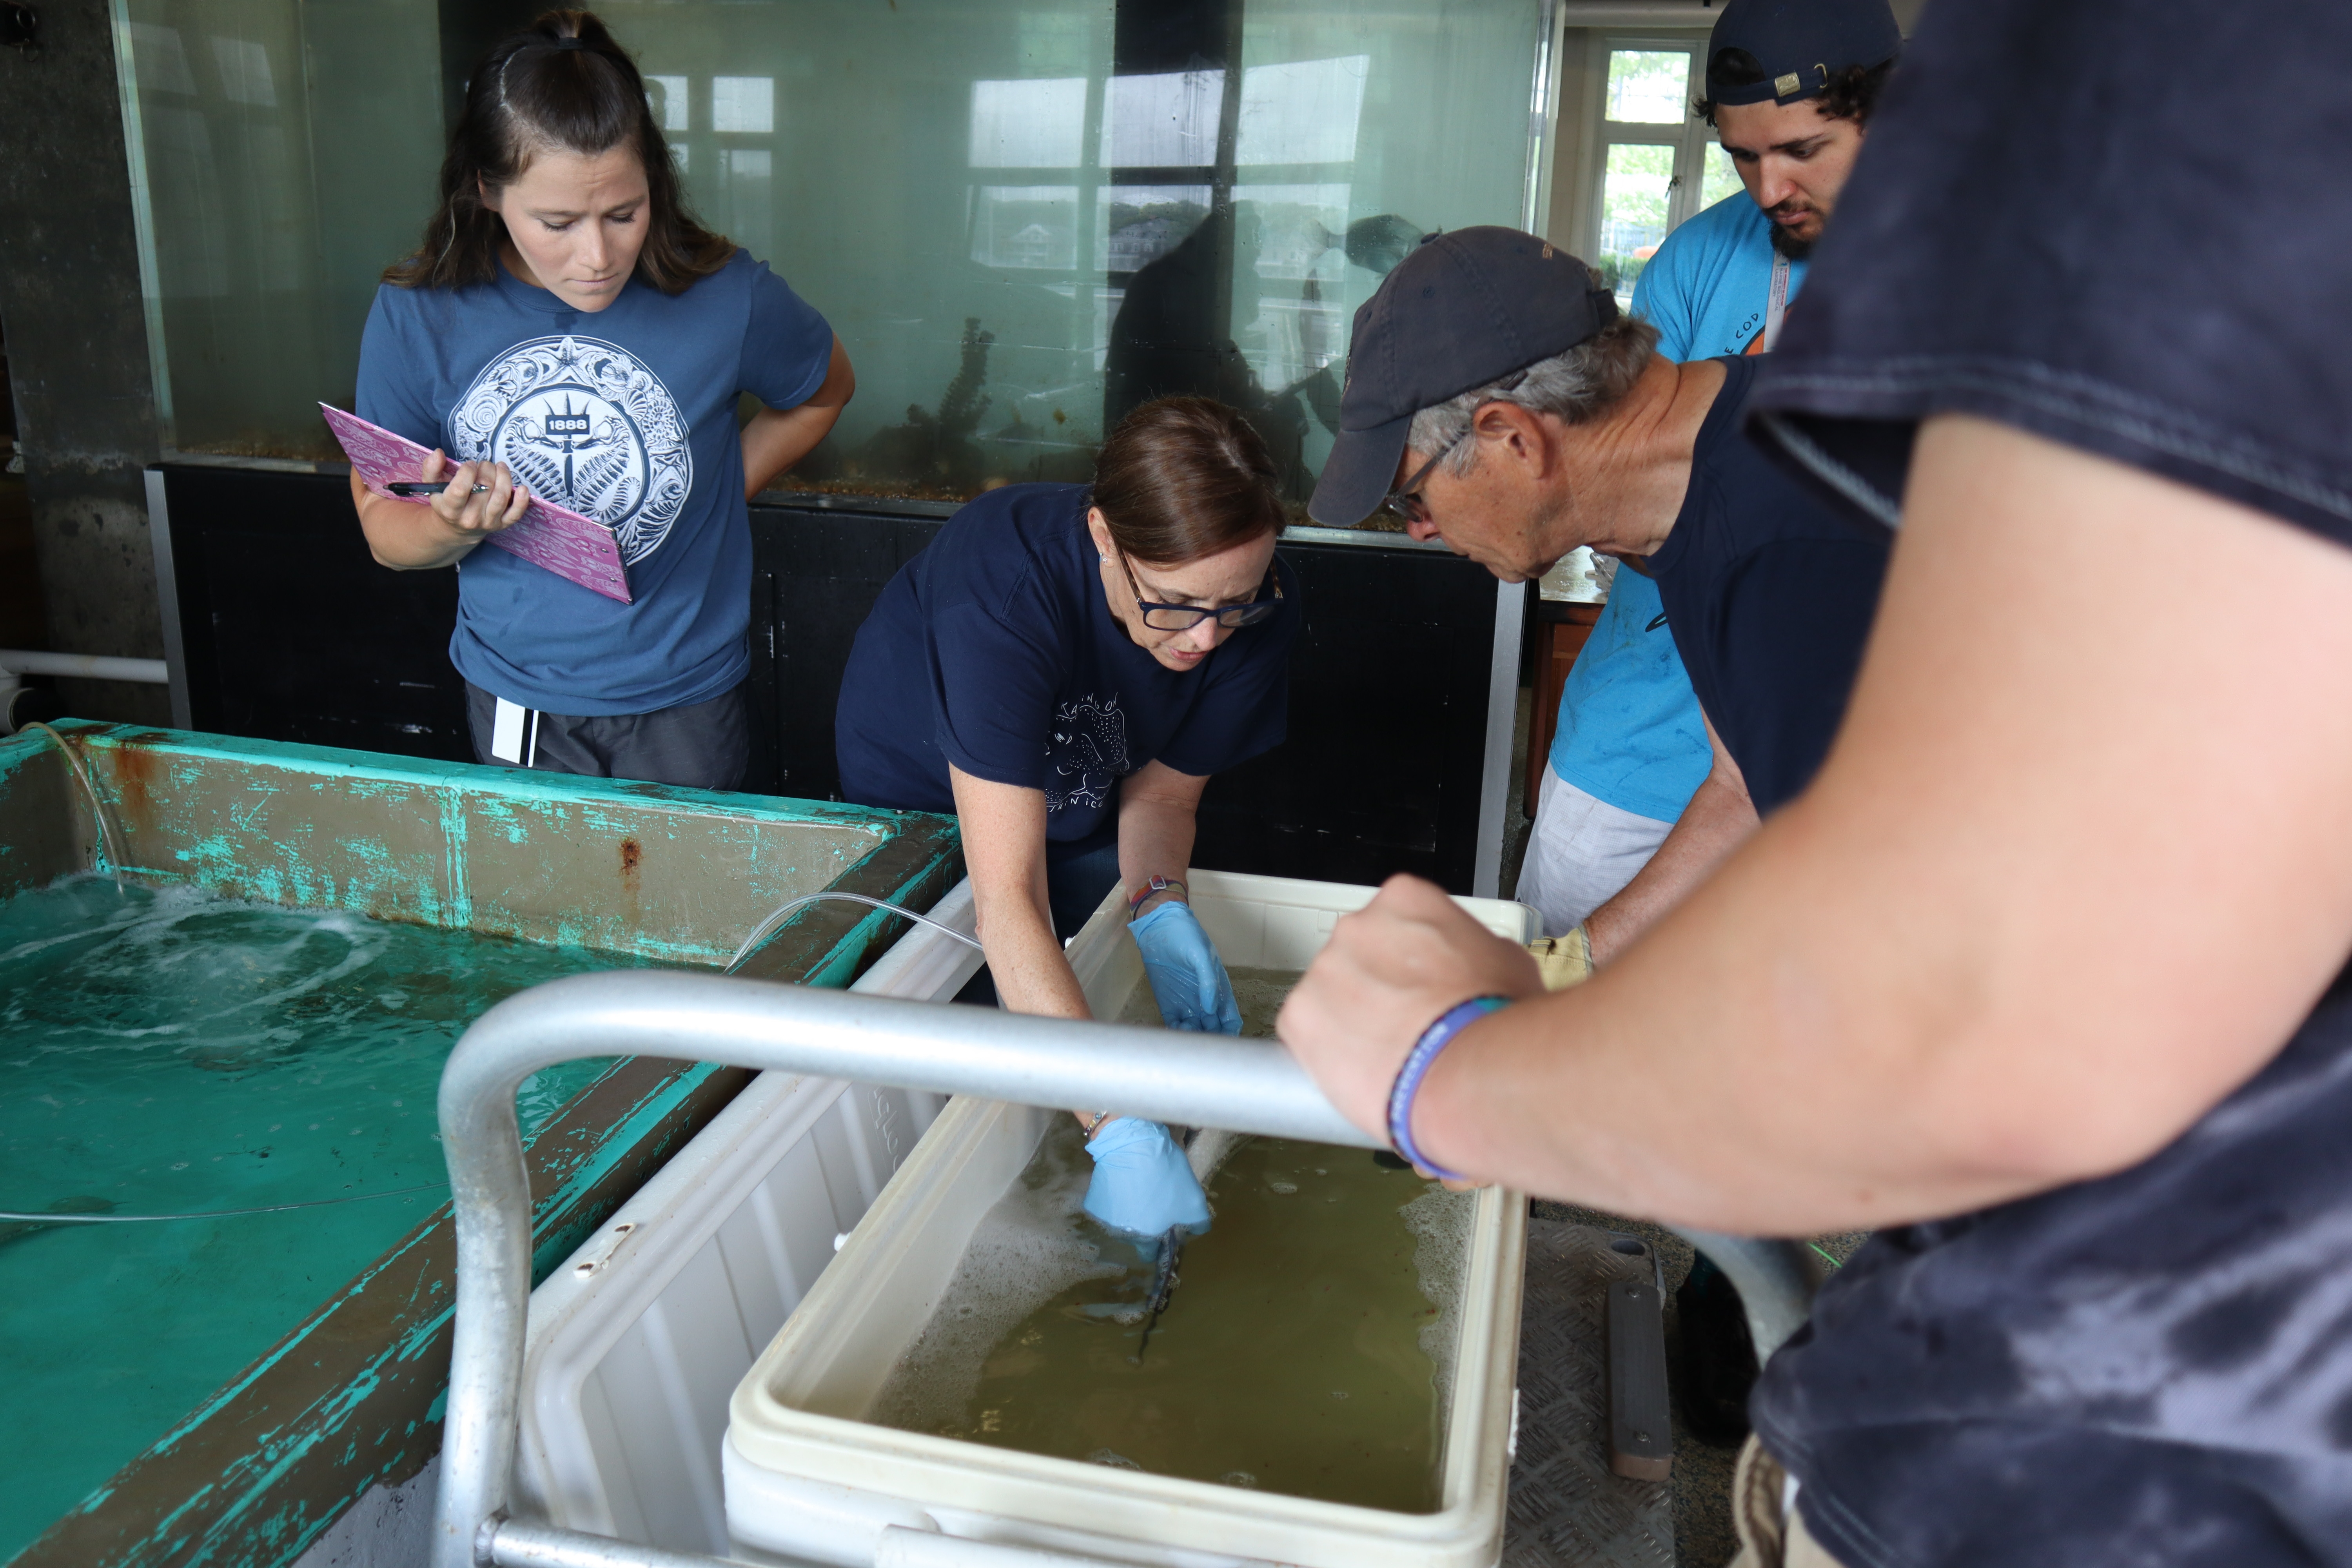 MBL Vet Lisa Abbo and others bend down to check on an anesthesized striped bass in a cooler. The bass was anesthesized during a tagging event and was later released. 2023. Credit: Emily Greenhalgh